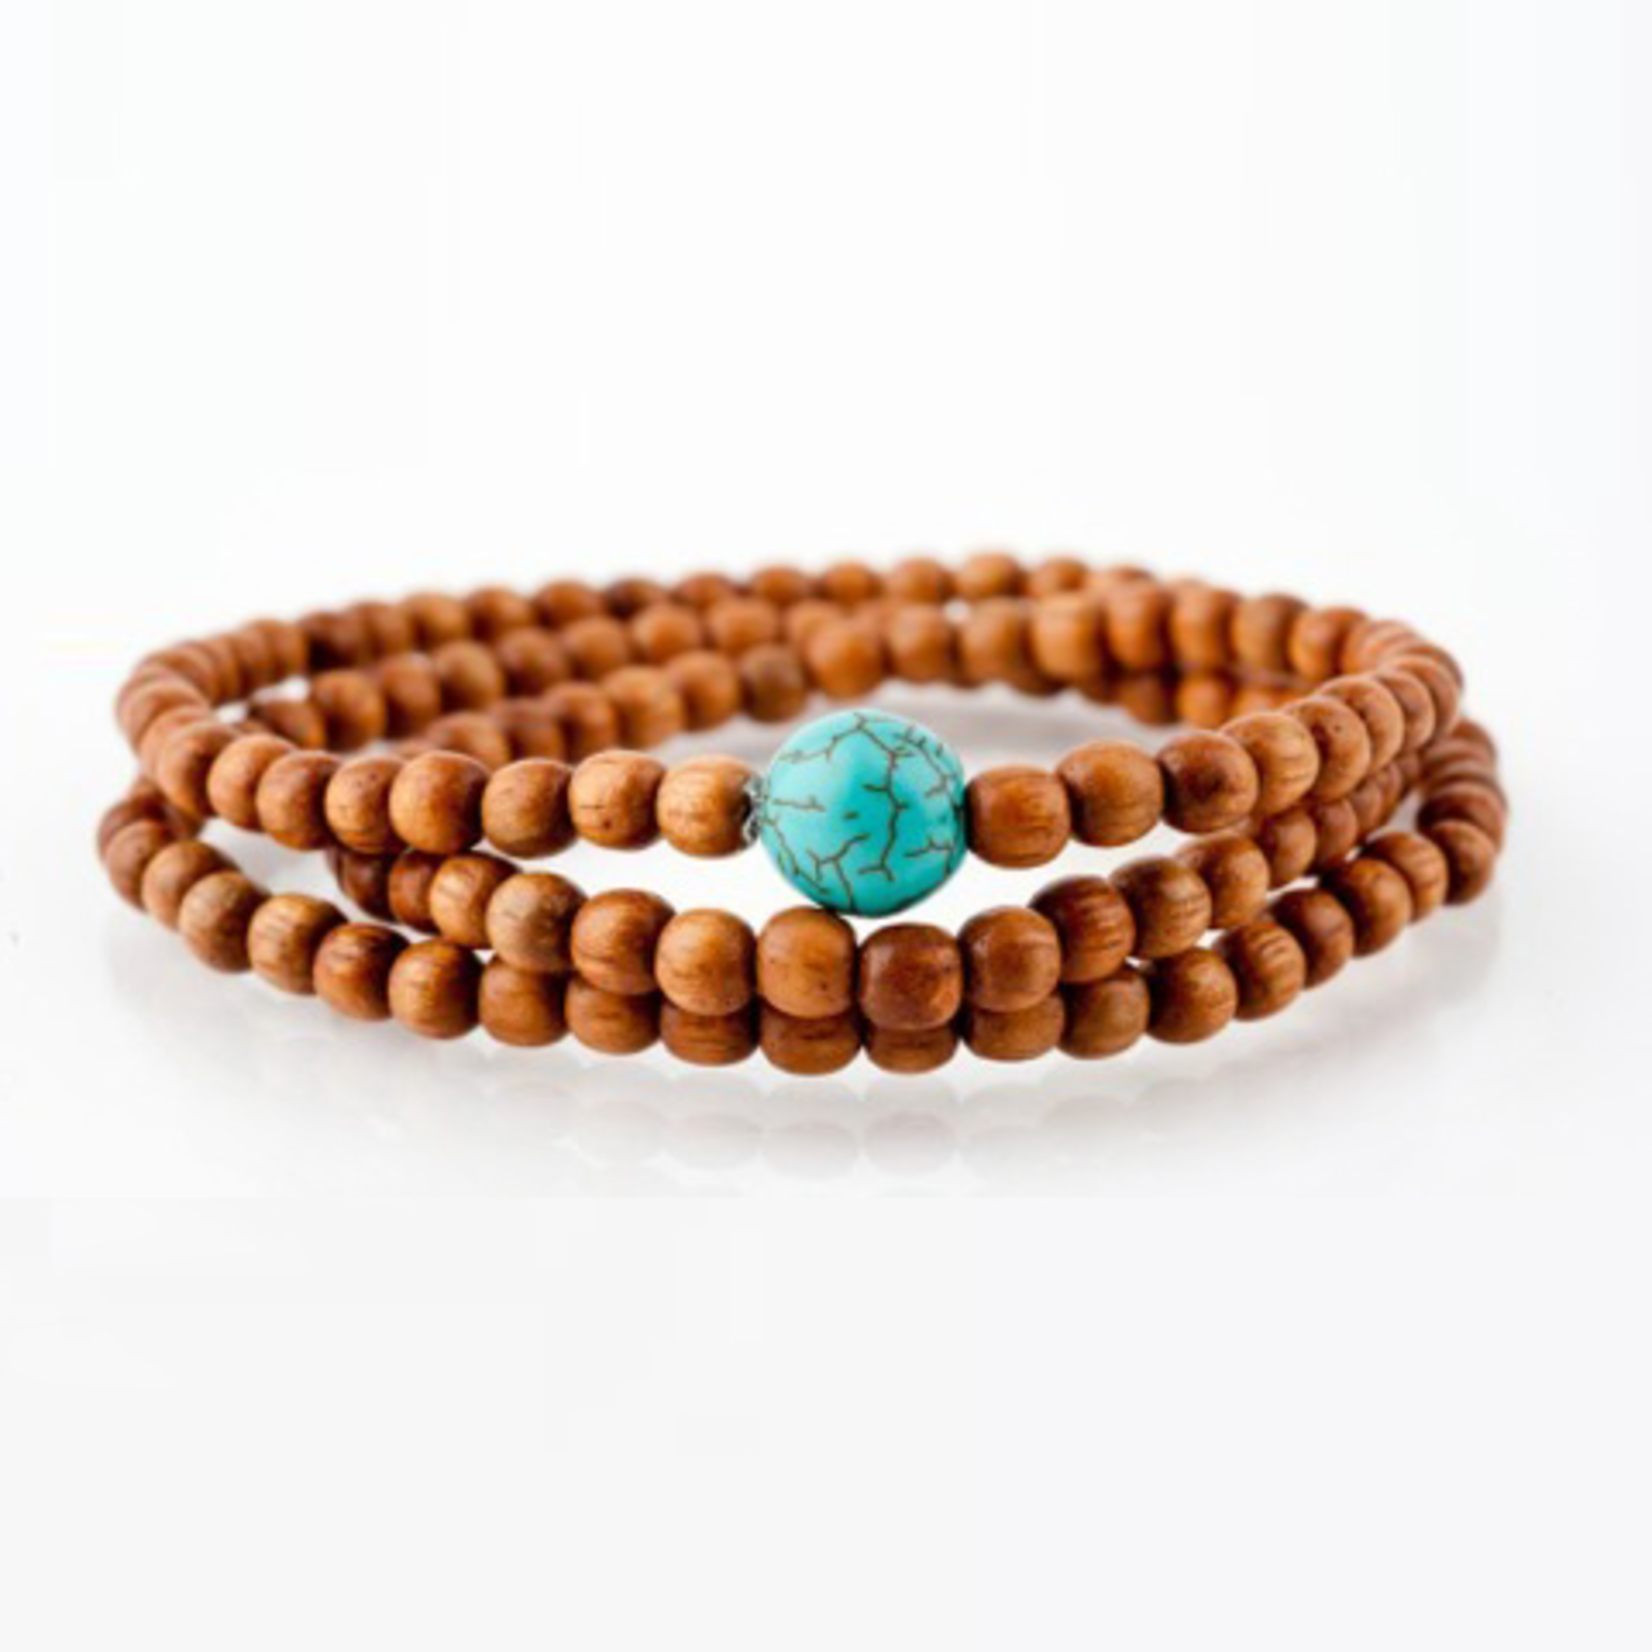 Mina Danielle Light Brown Wrap with Turquoise Bead